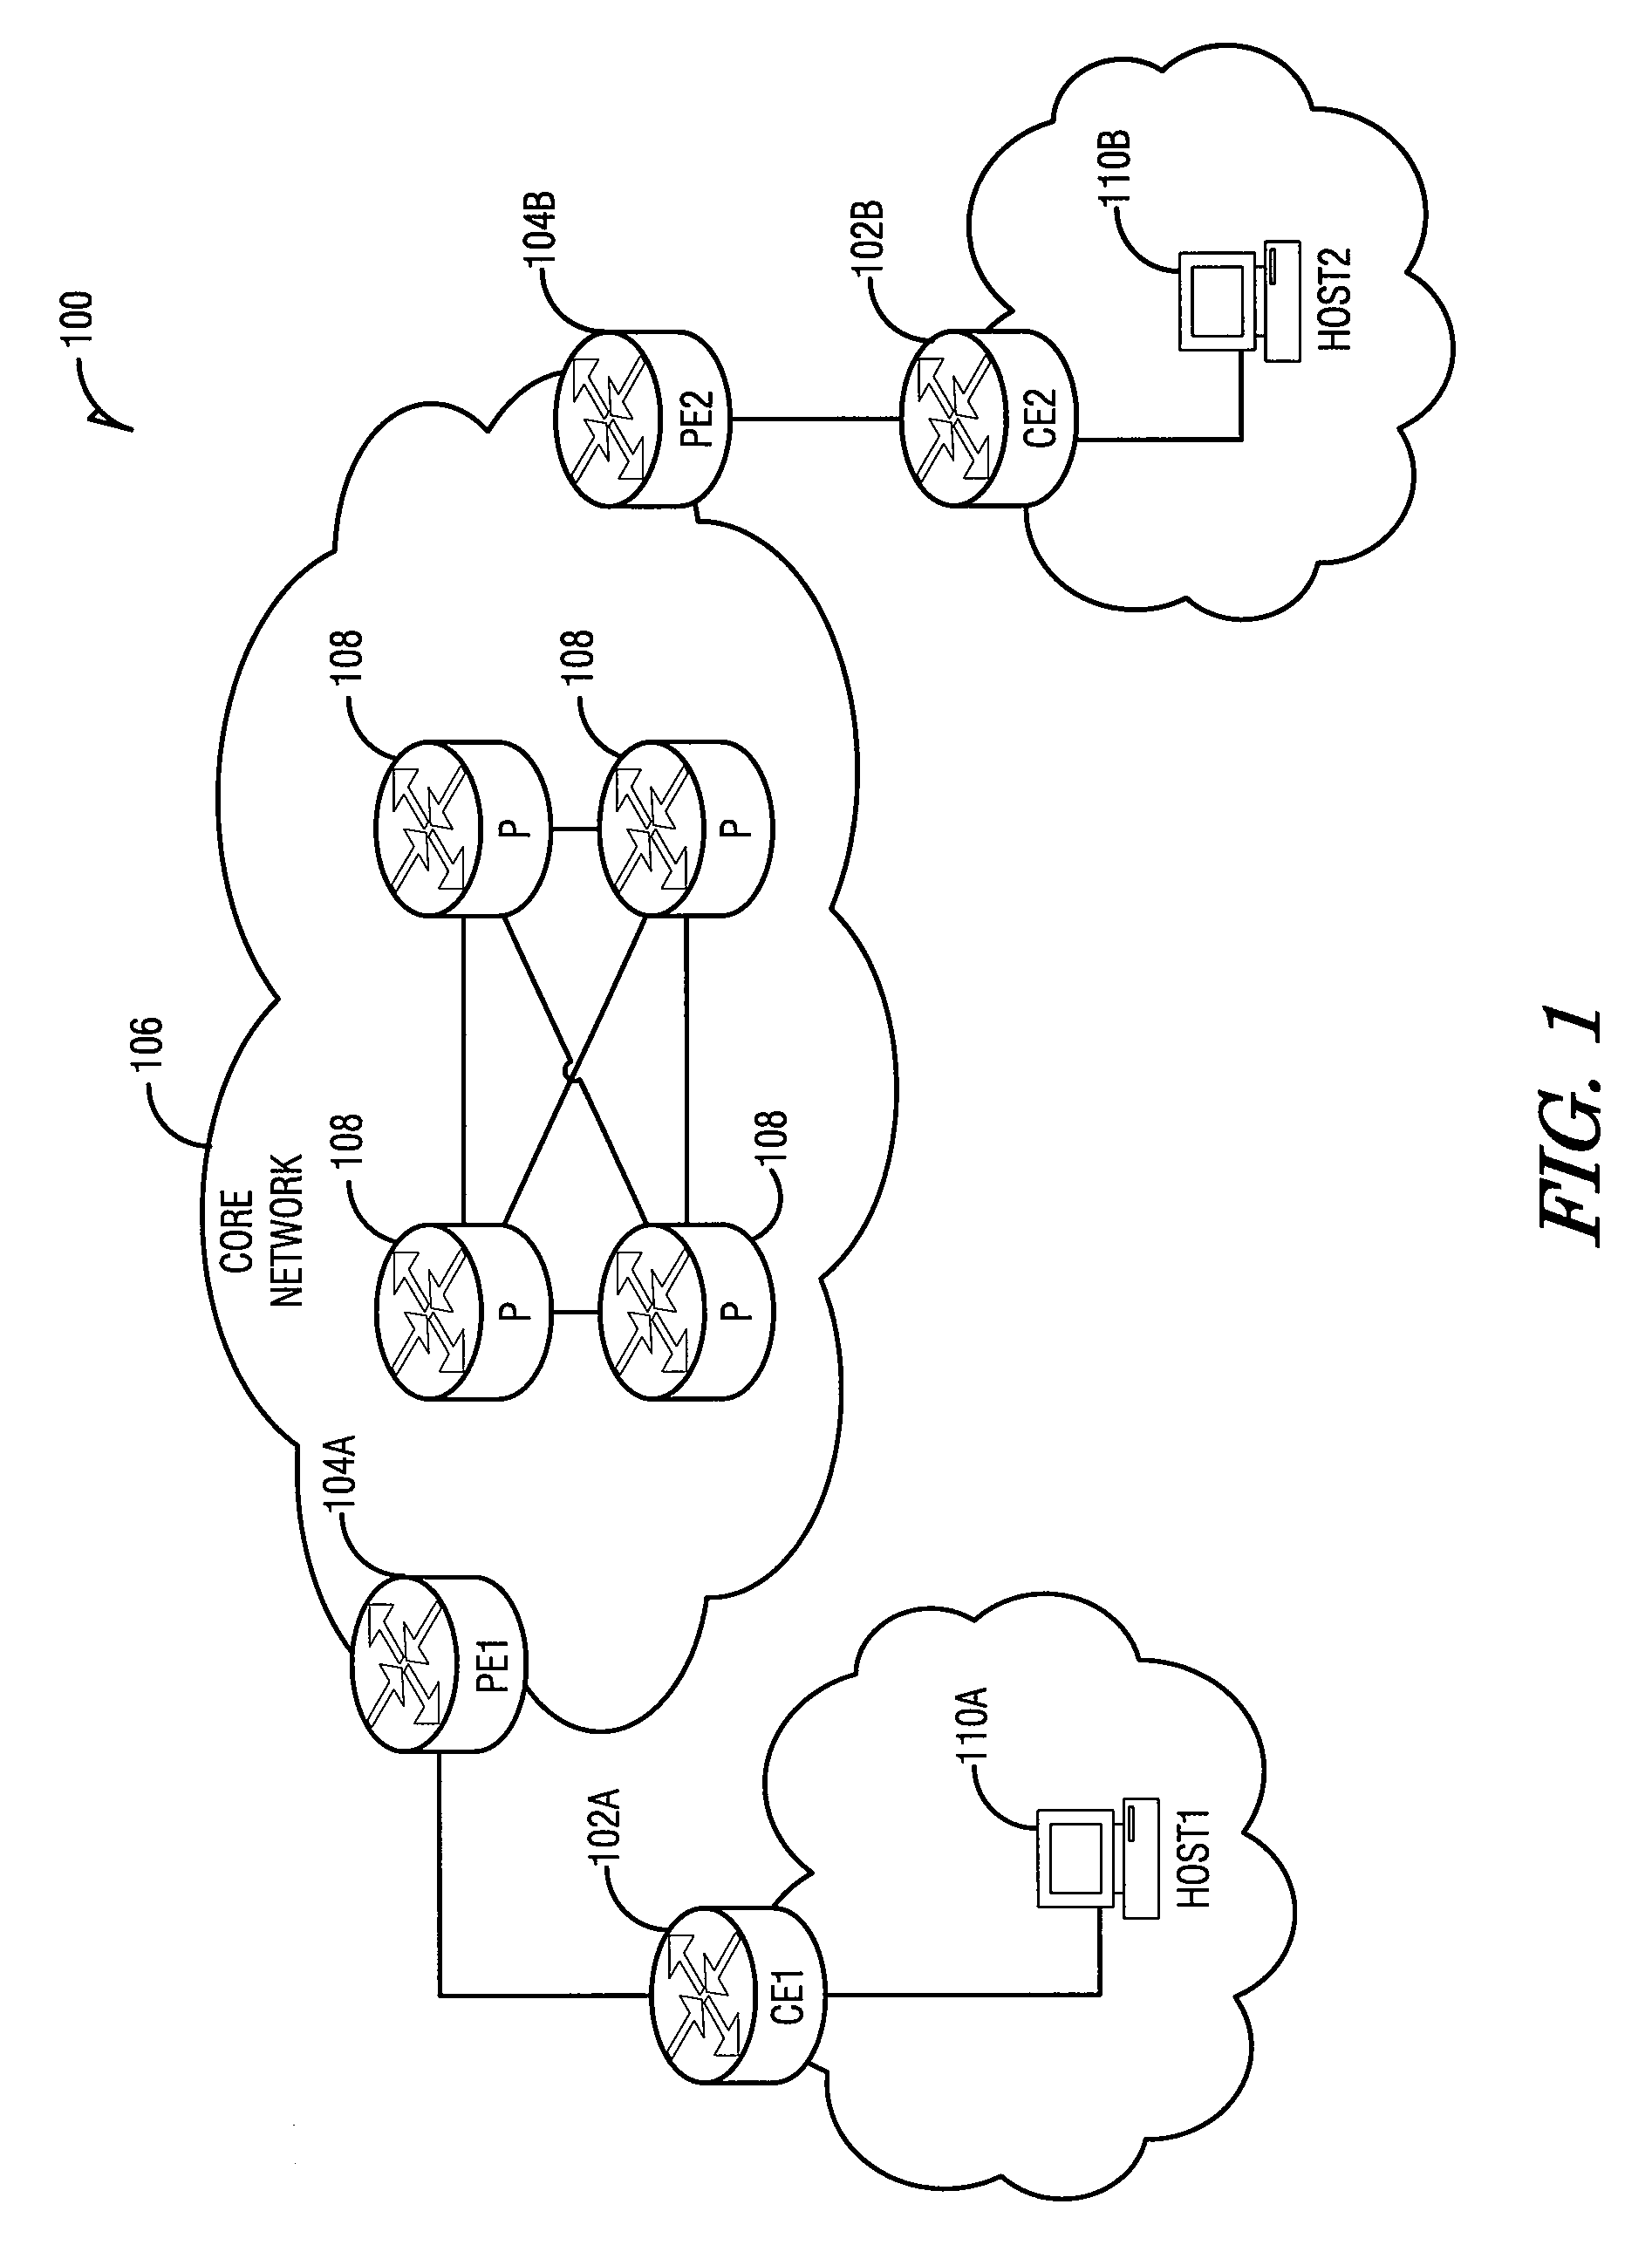 Pure control-plane approach for on-path connection admission control operations in multiprotocol label switching virtual private networks